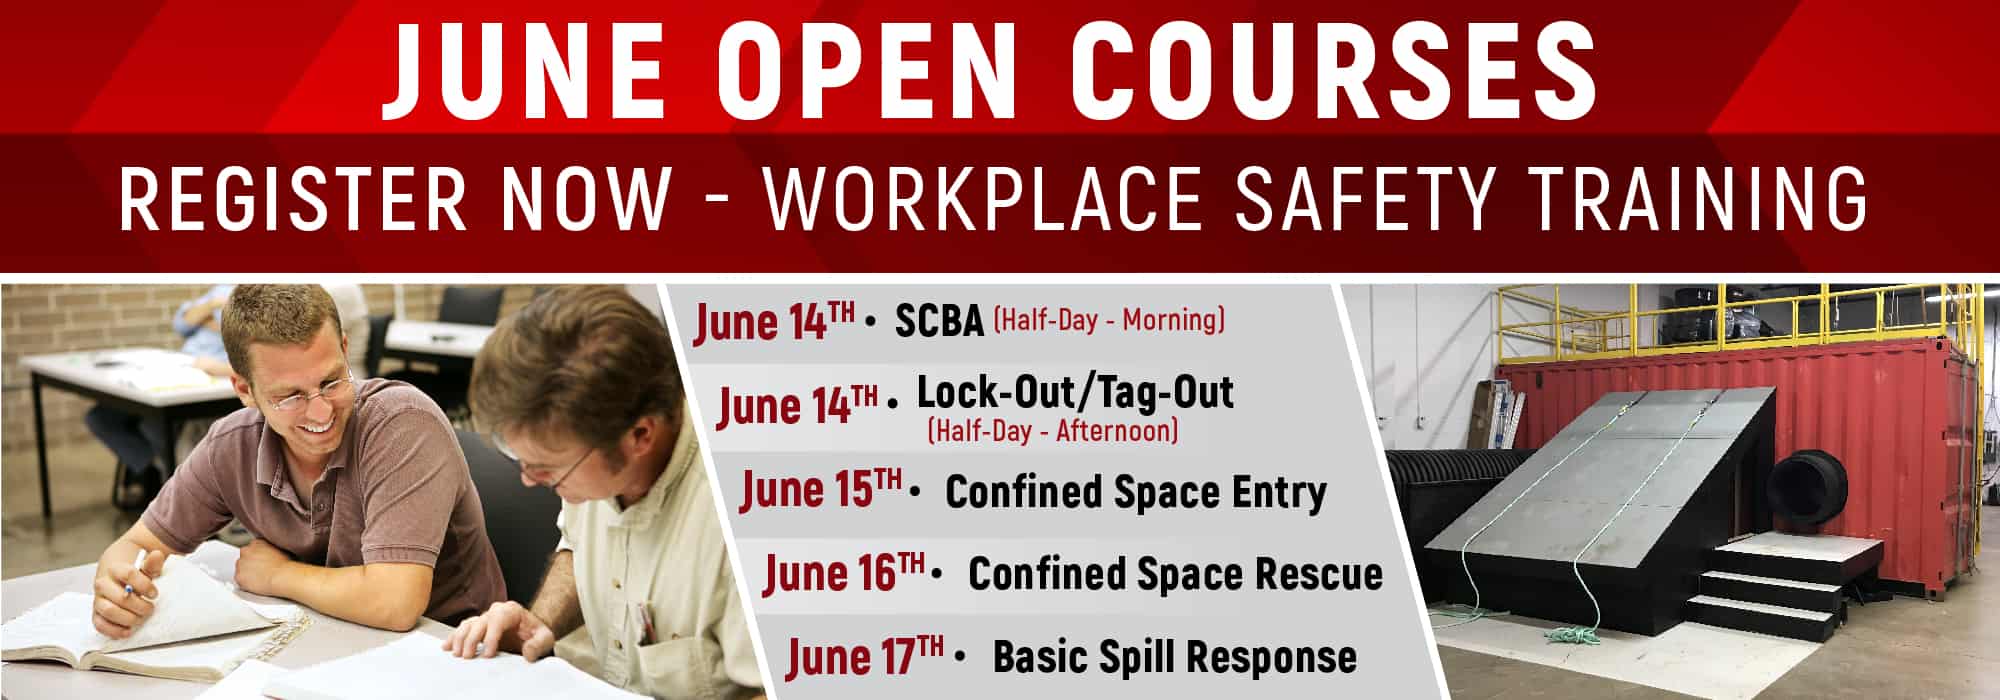 Home banner for June open courses